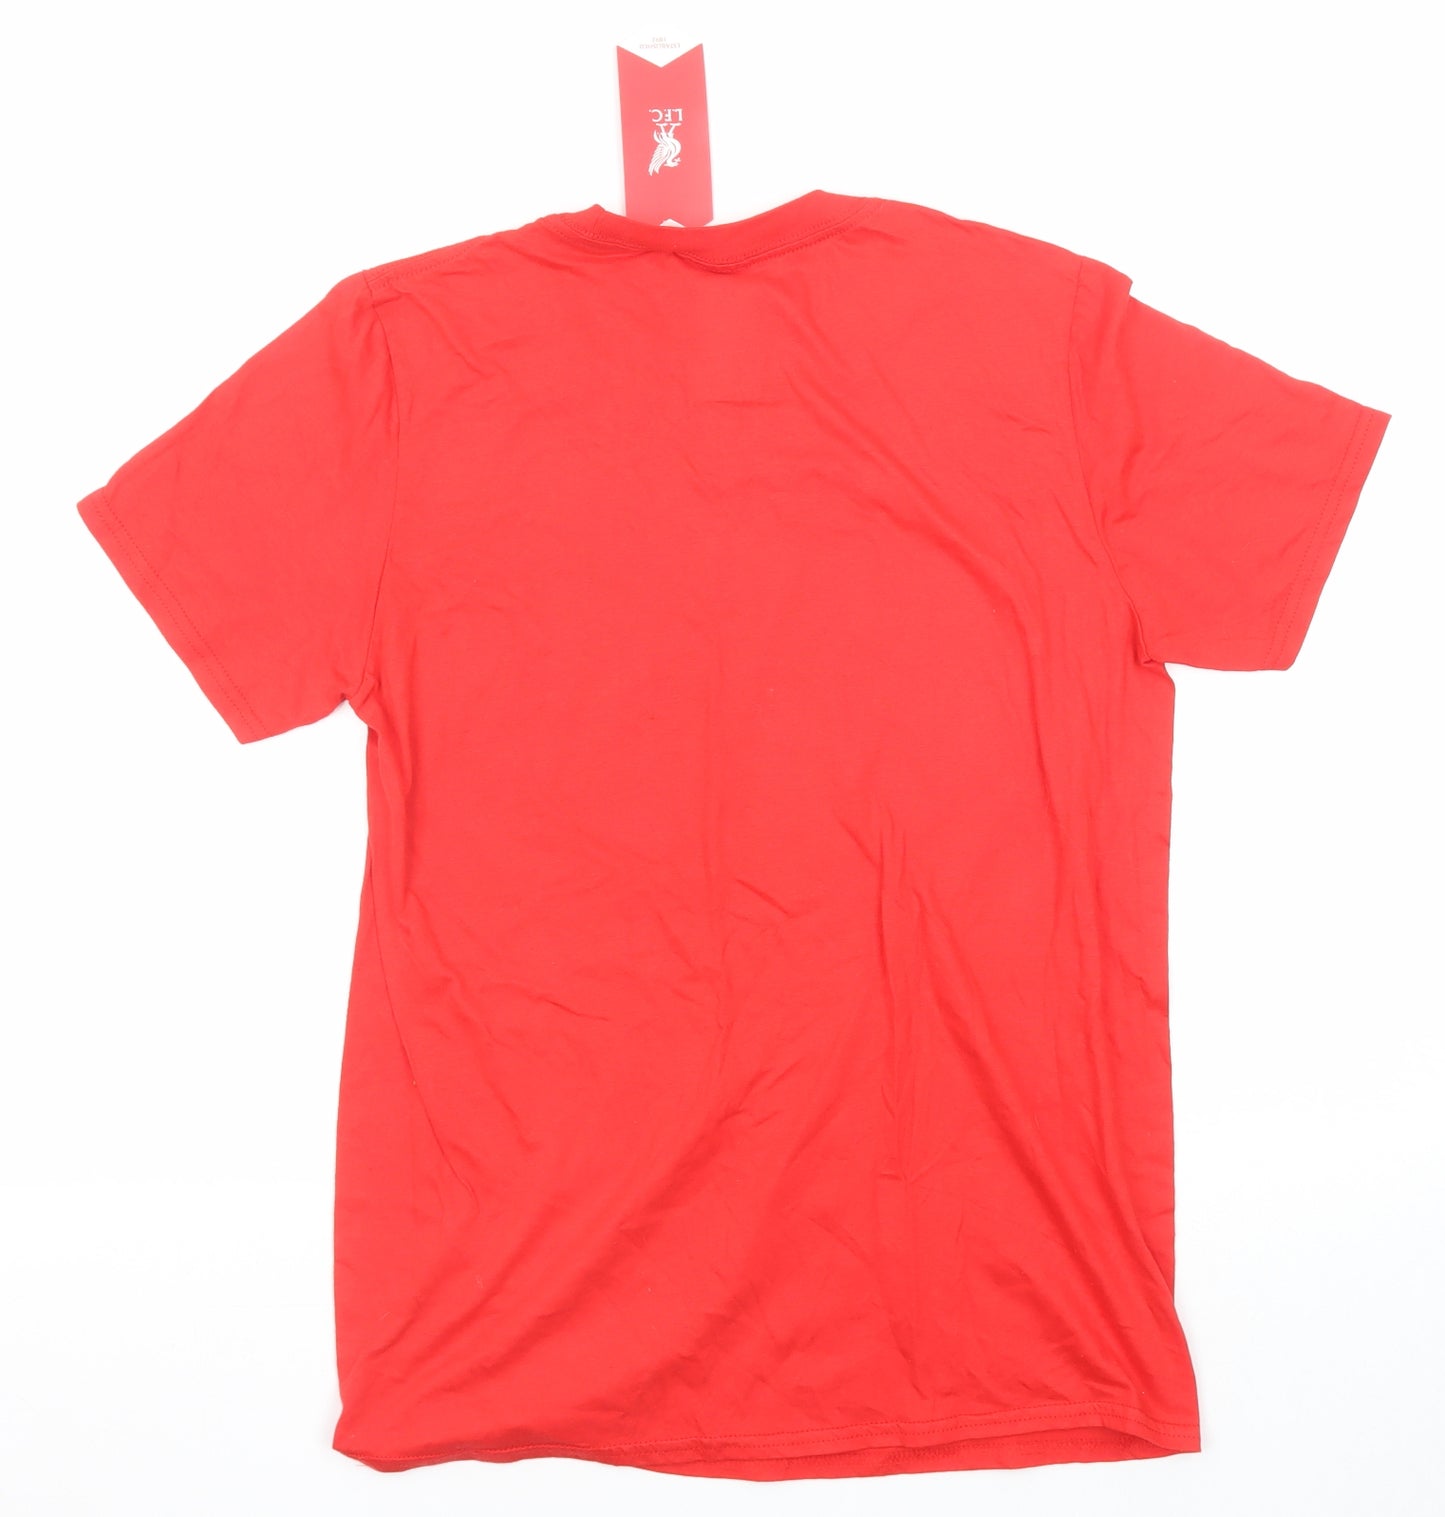 Liverpool FC Mens Red Cotton T-Shirt Size S Round Neck